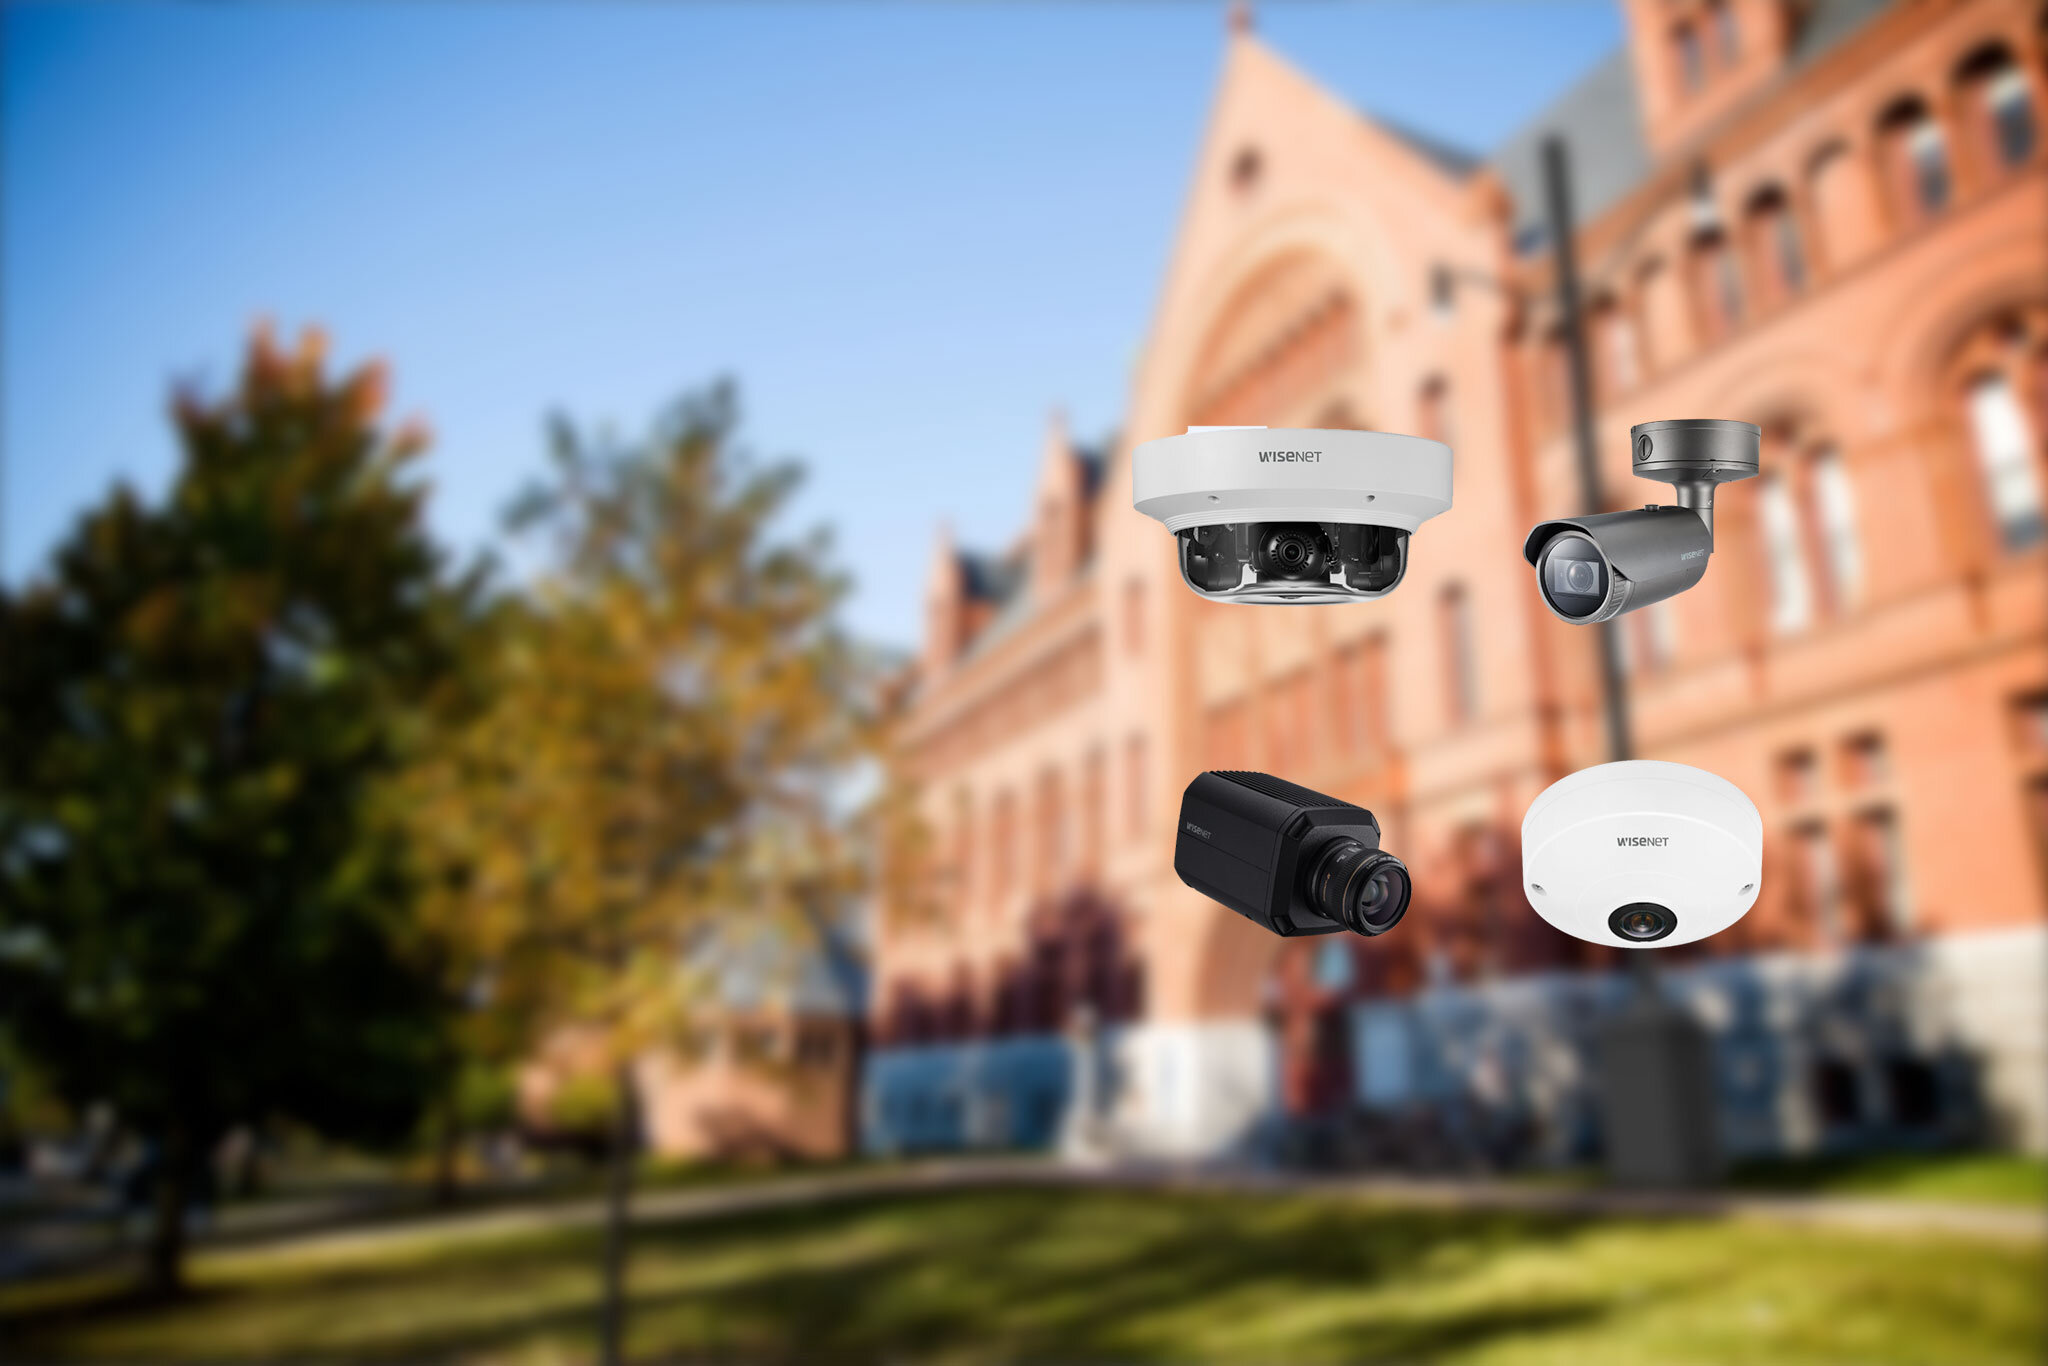   Hanwha   A global leader in the video surveillance industry   Learn more  